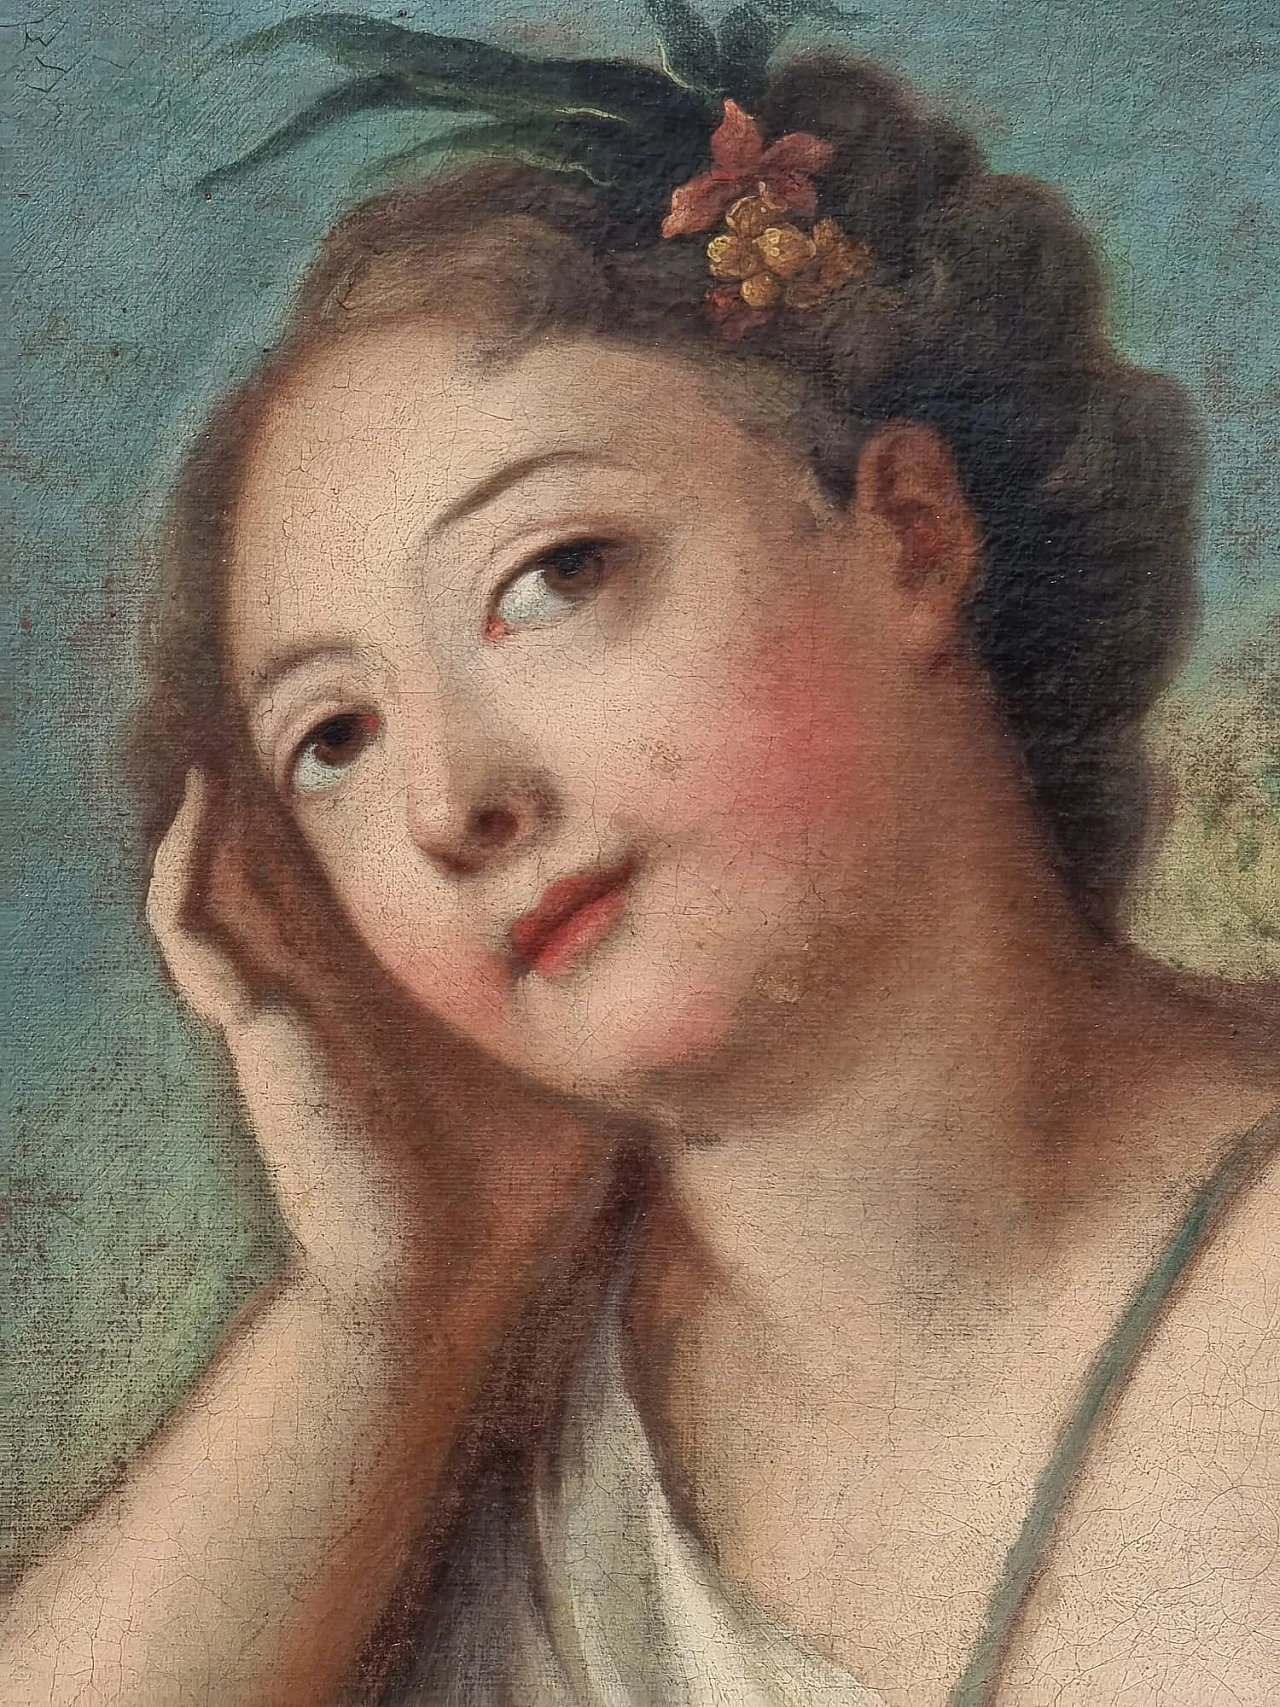 Water nymph, oil painting on canvas, 18th century 5